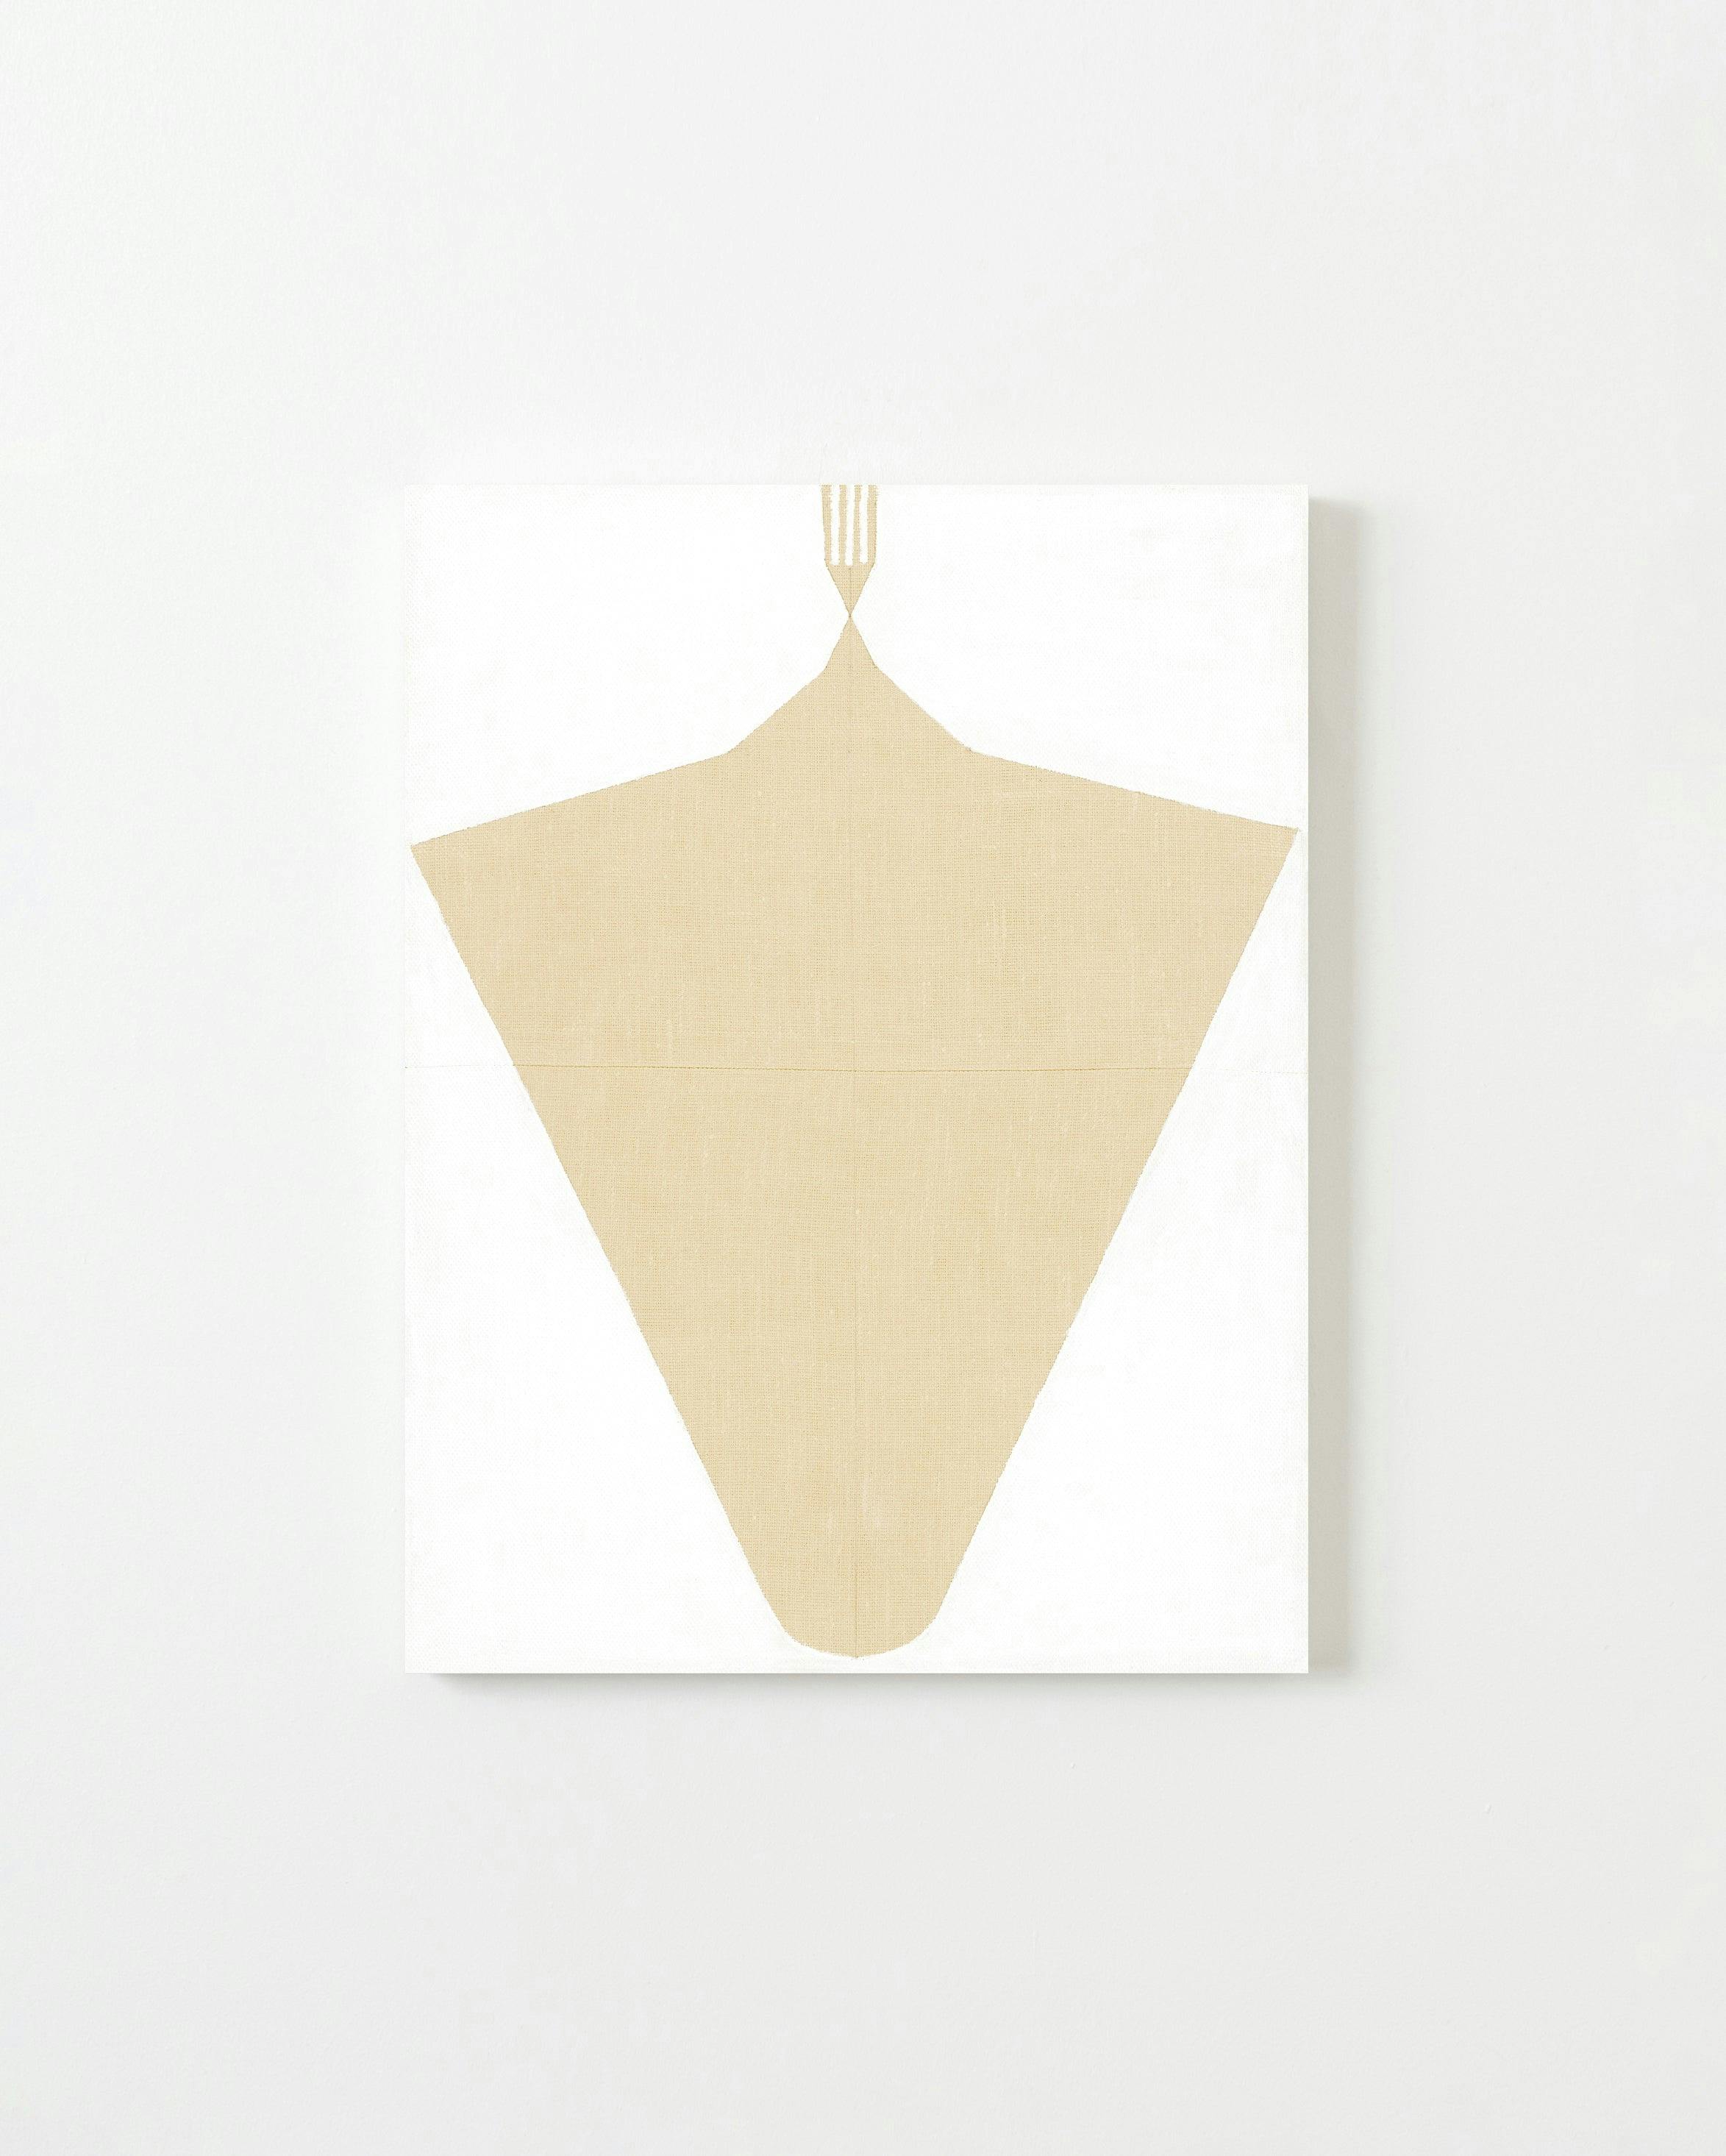 Painting by Aschely Vaughan Cone titled "Small White Ray I".